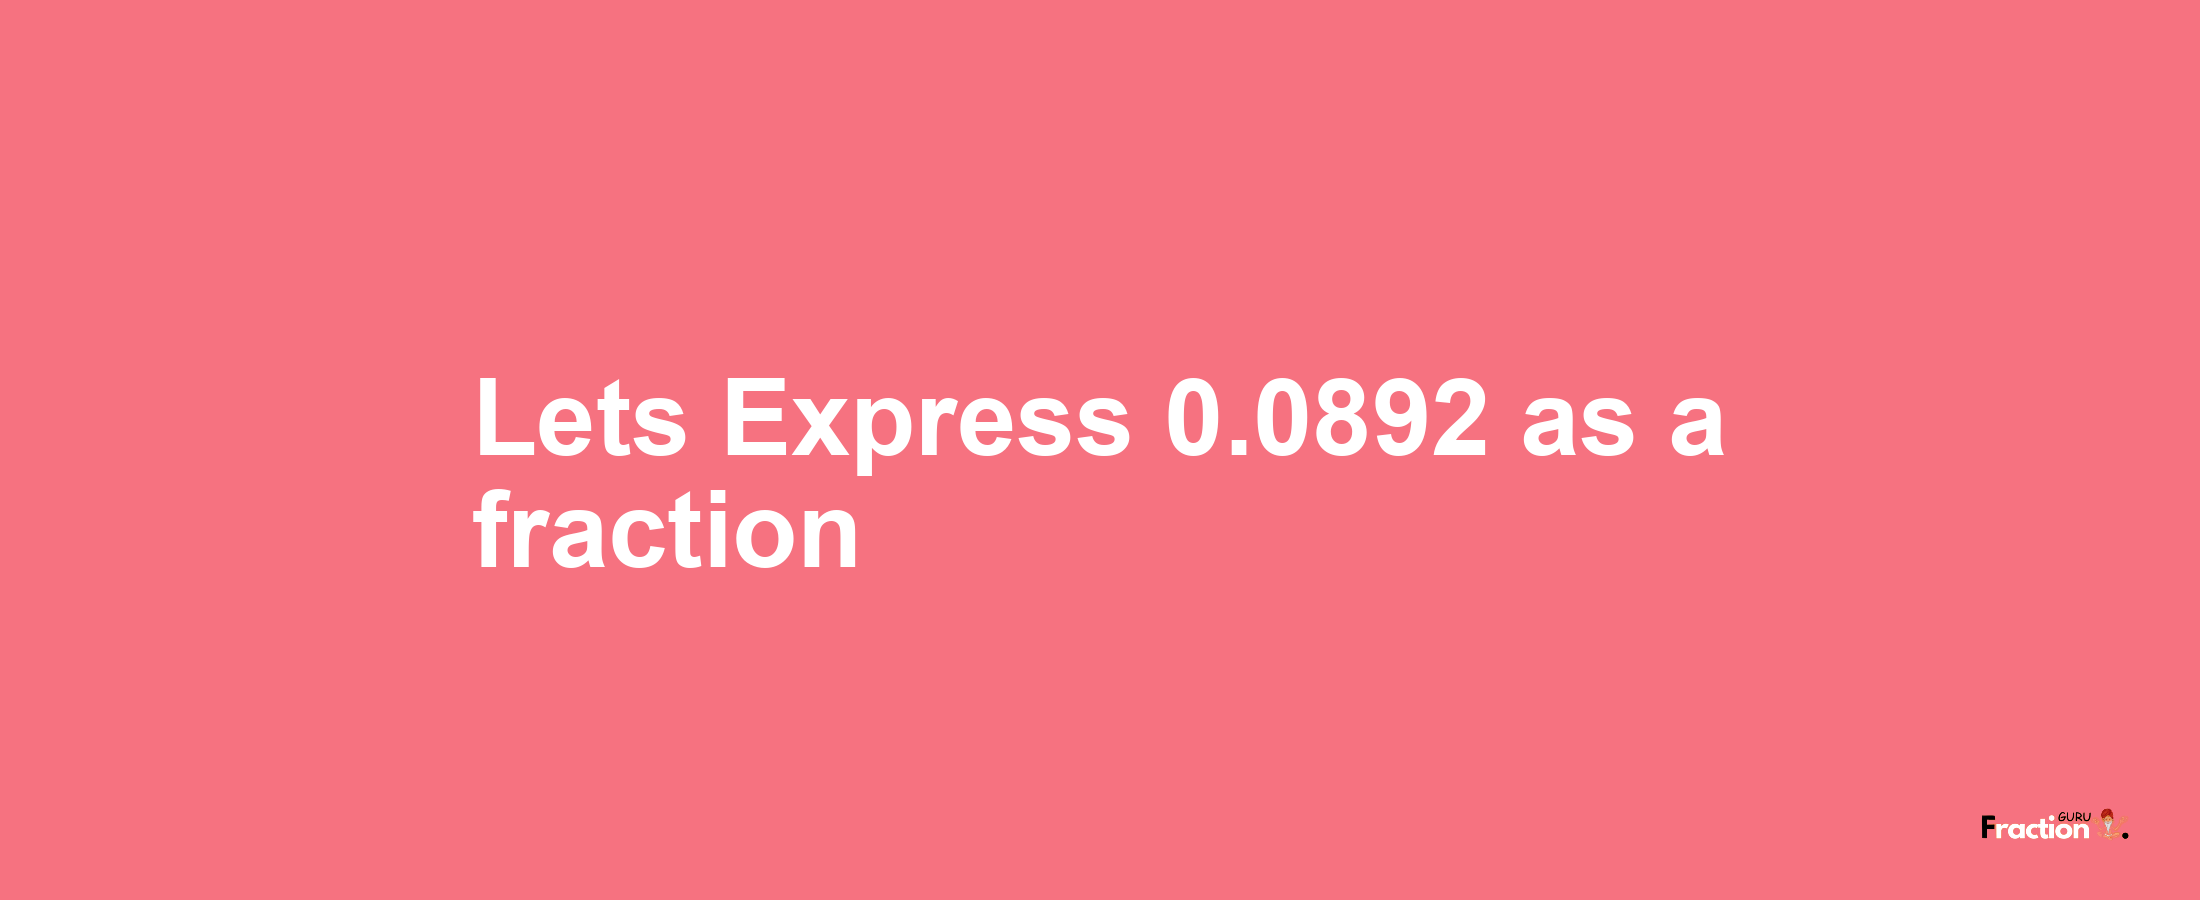 Lets Express 0.0892 as afraction